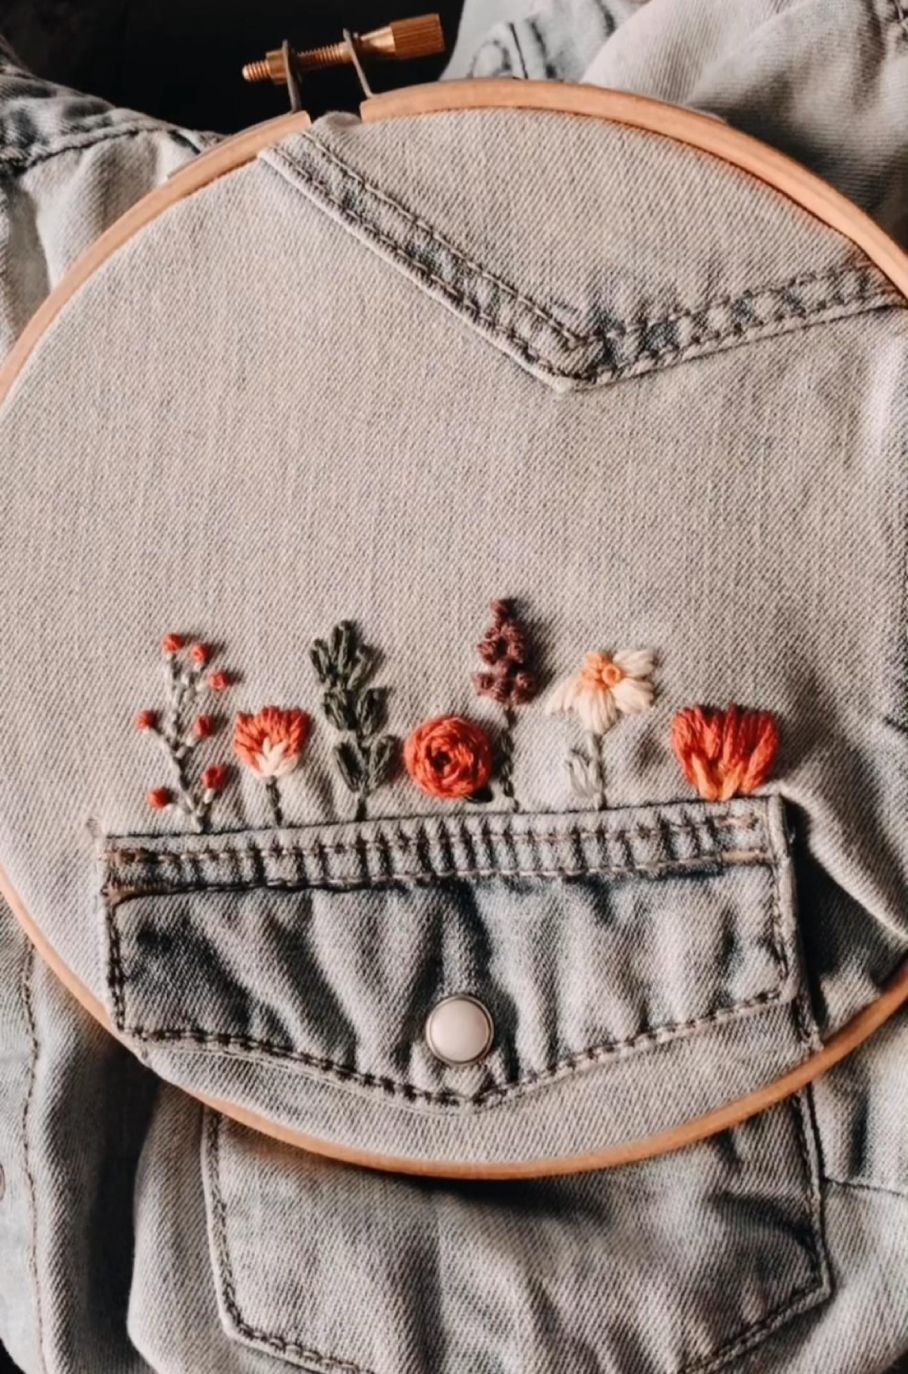 Embroidery on clothes